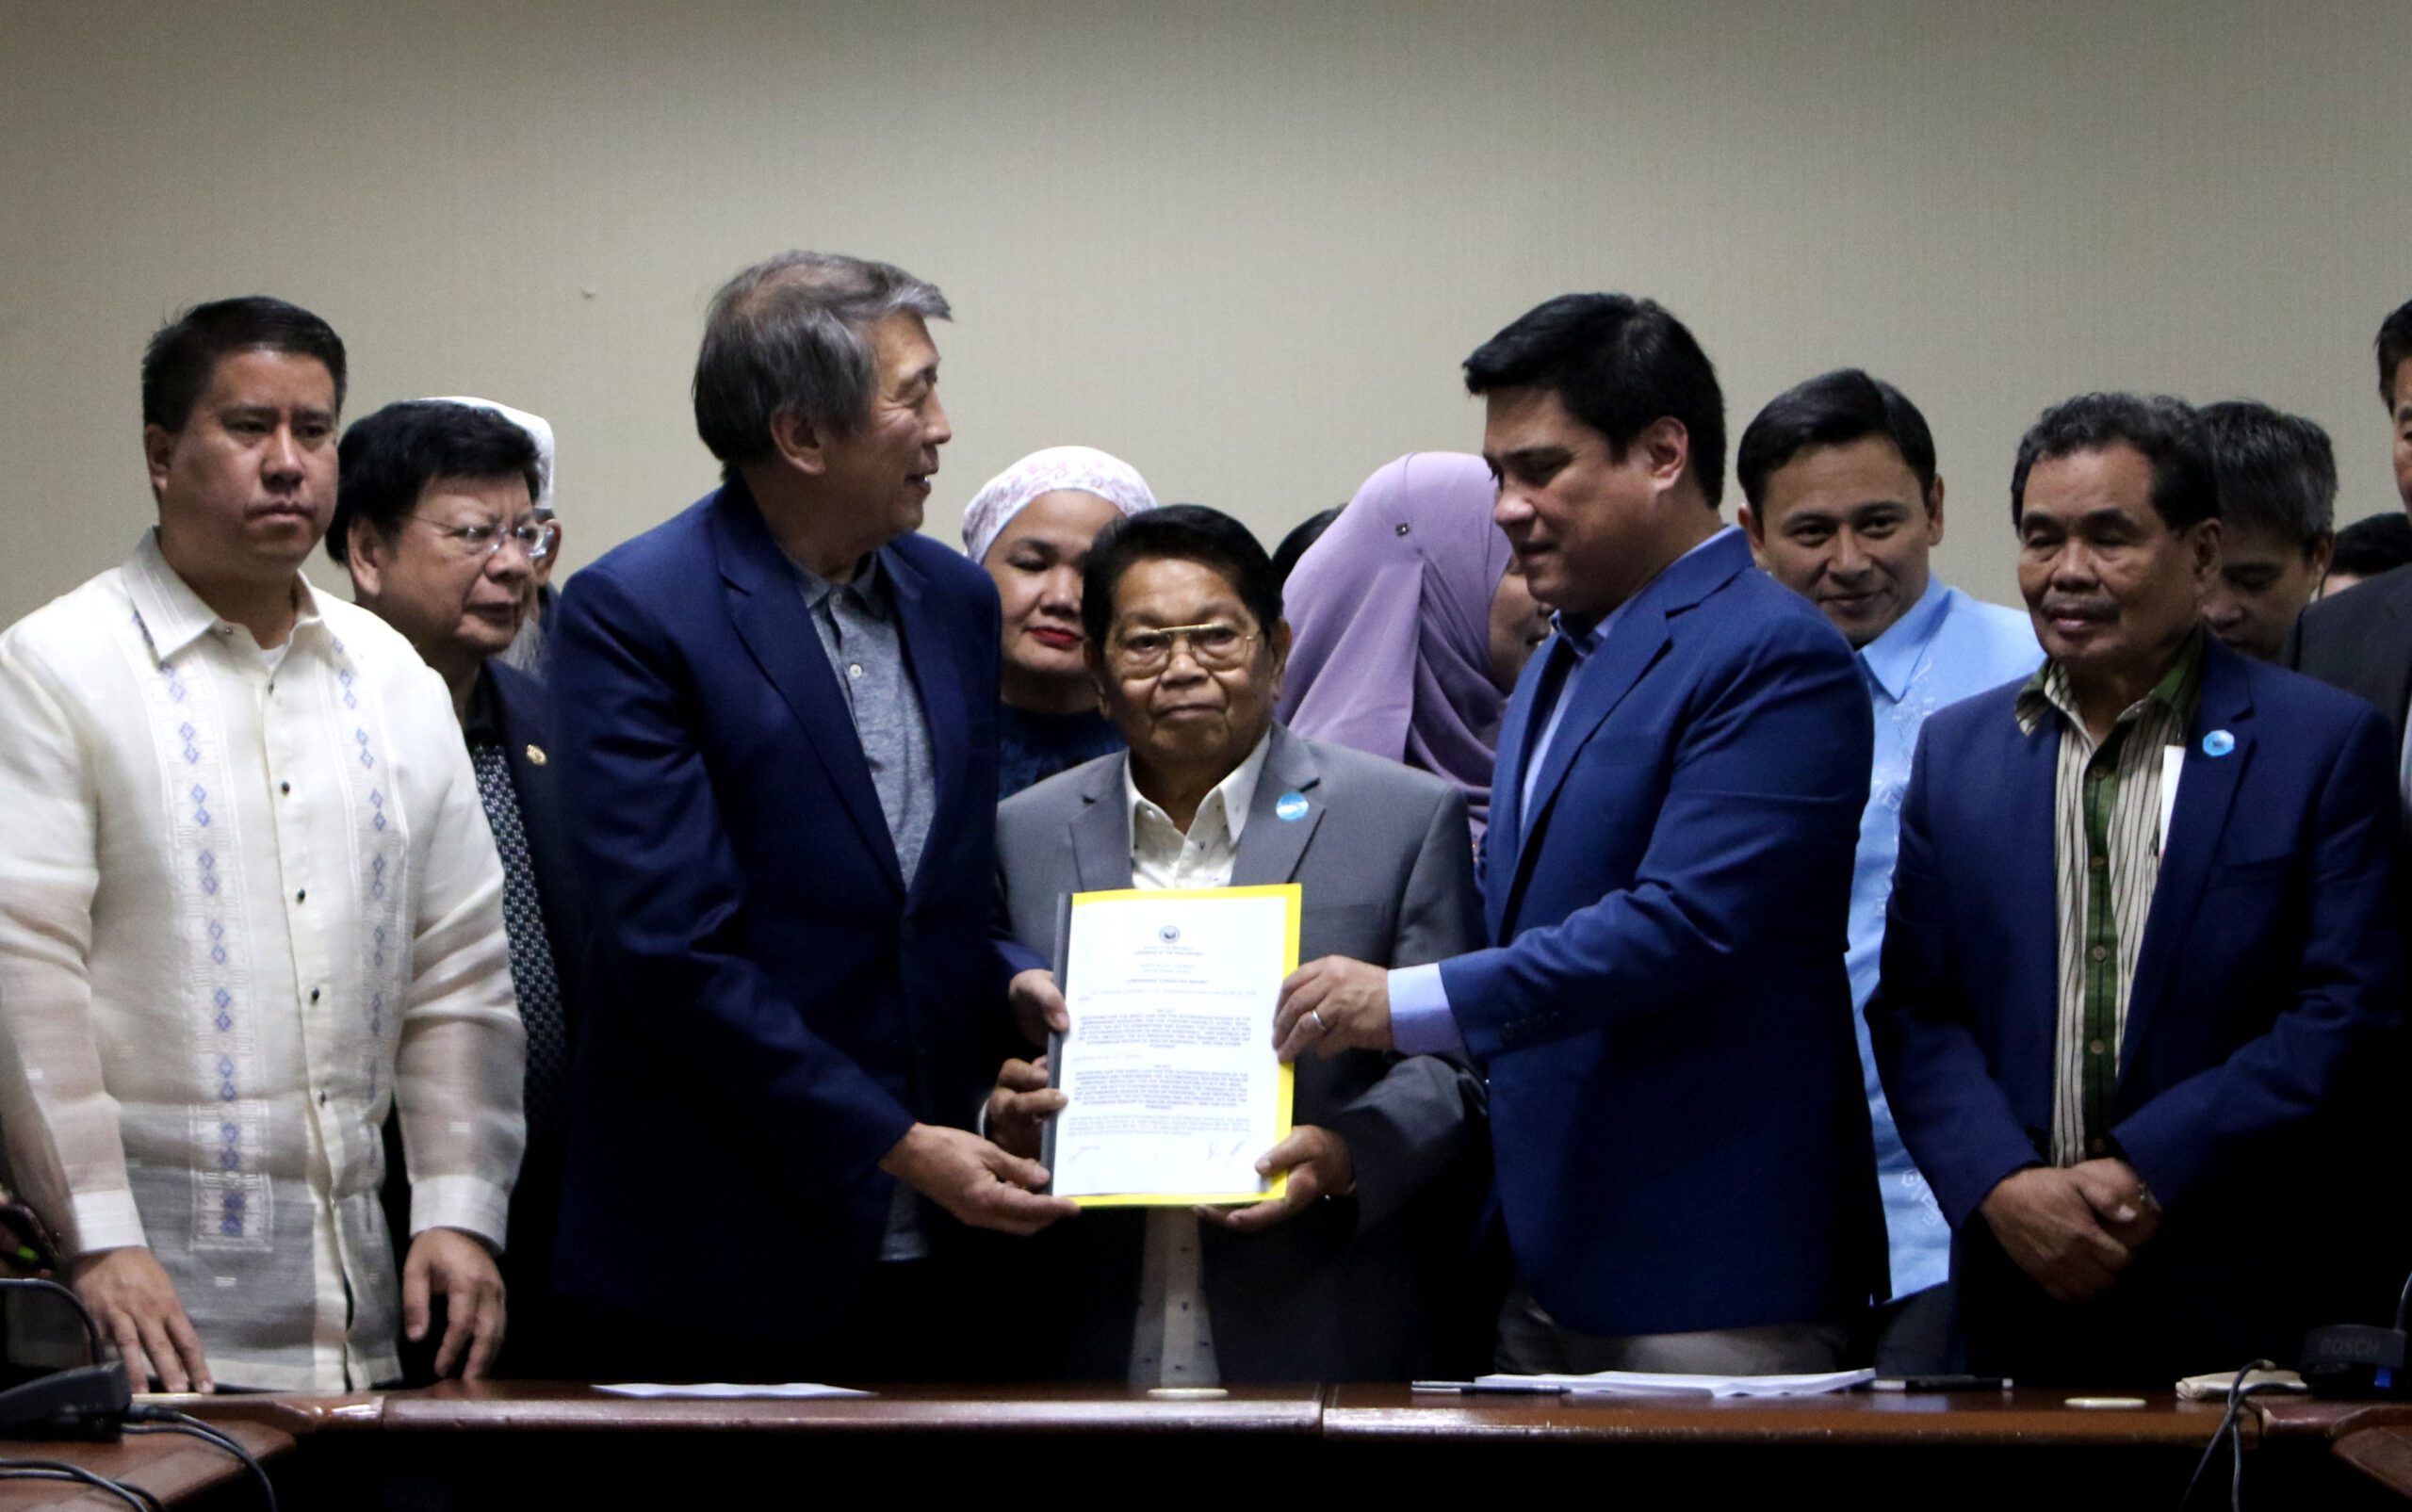 SWS says Filipinos ‘neutral’ on proposed Bangsamoro law